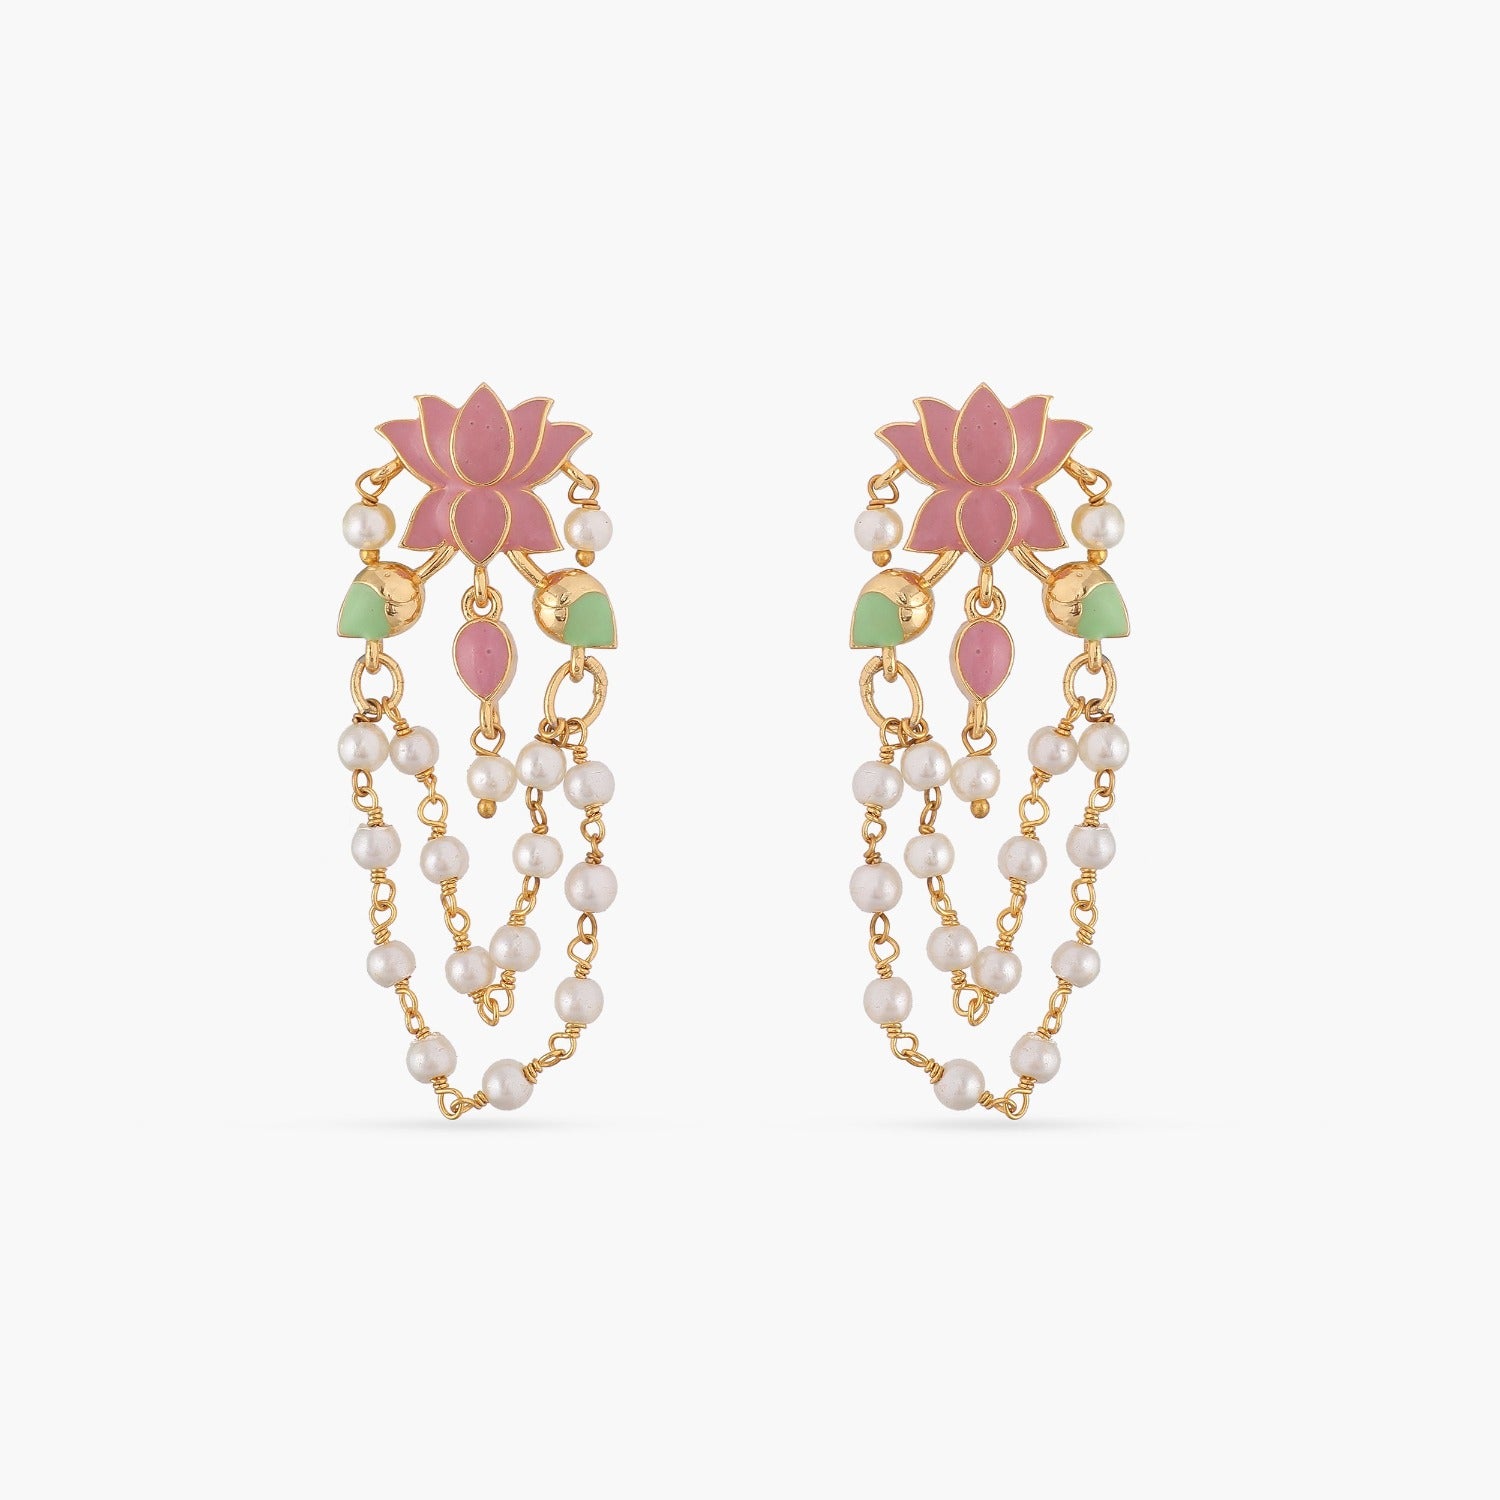 A picture of a pair of Indian artificial pink flower earrings with white pearls.